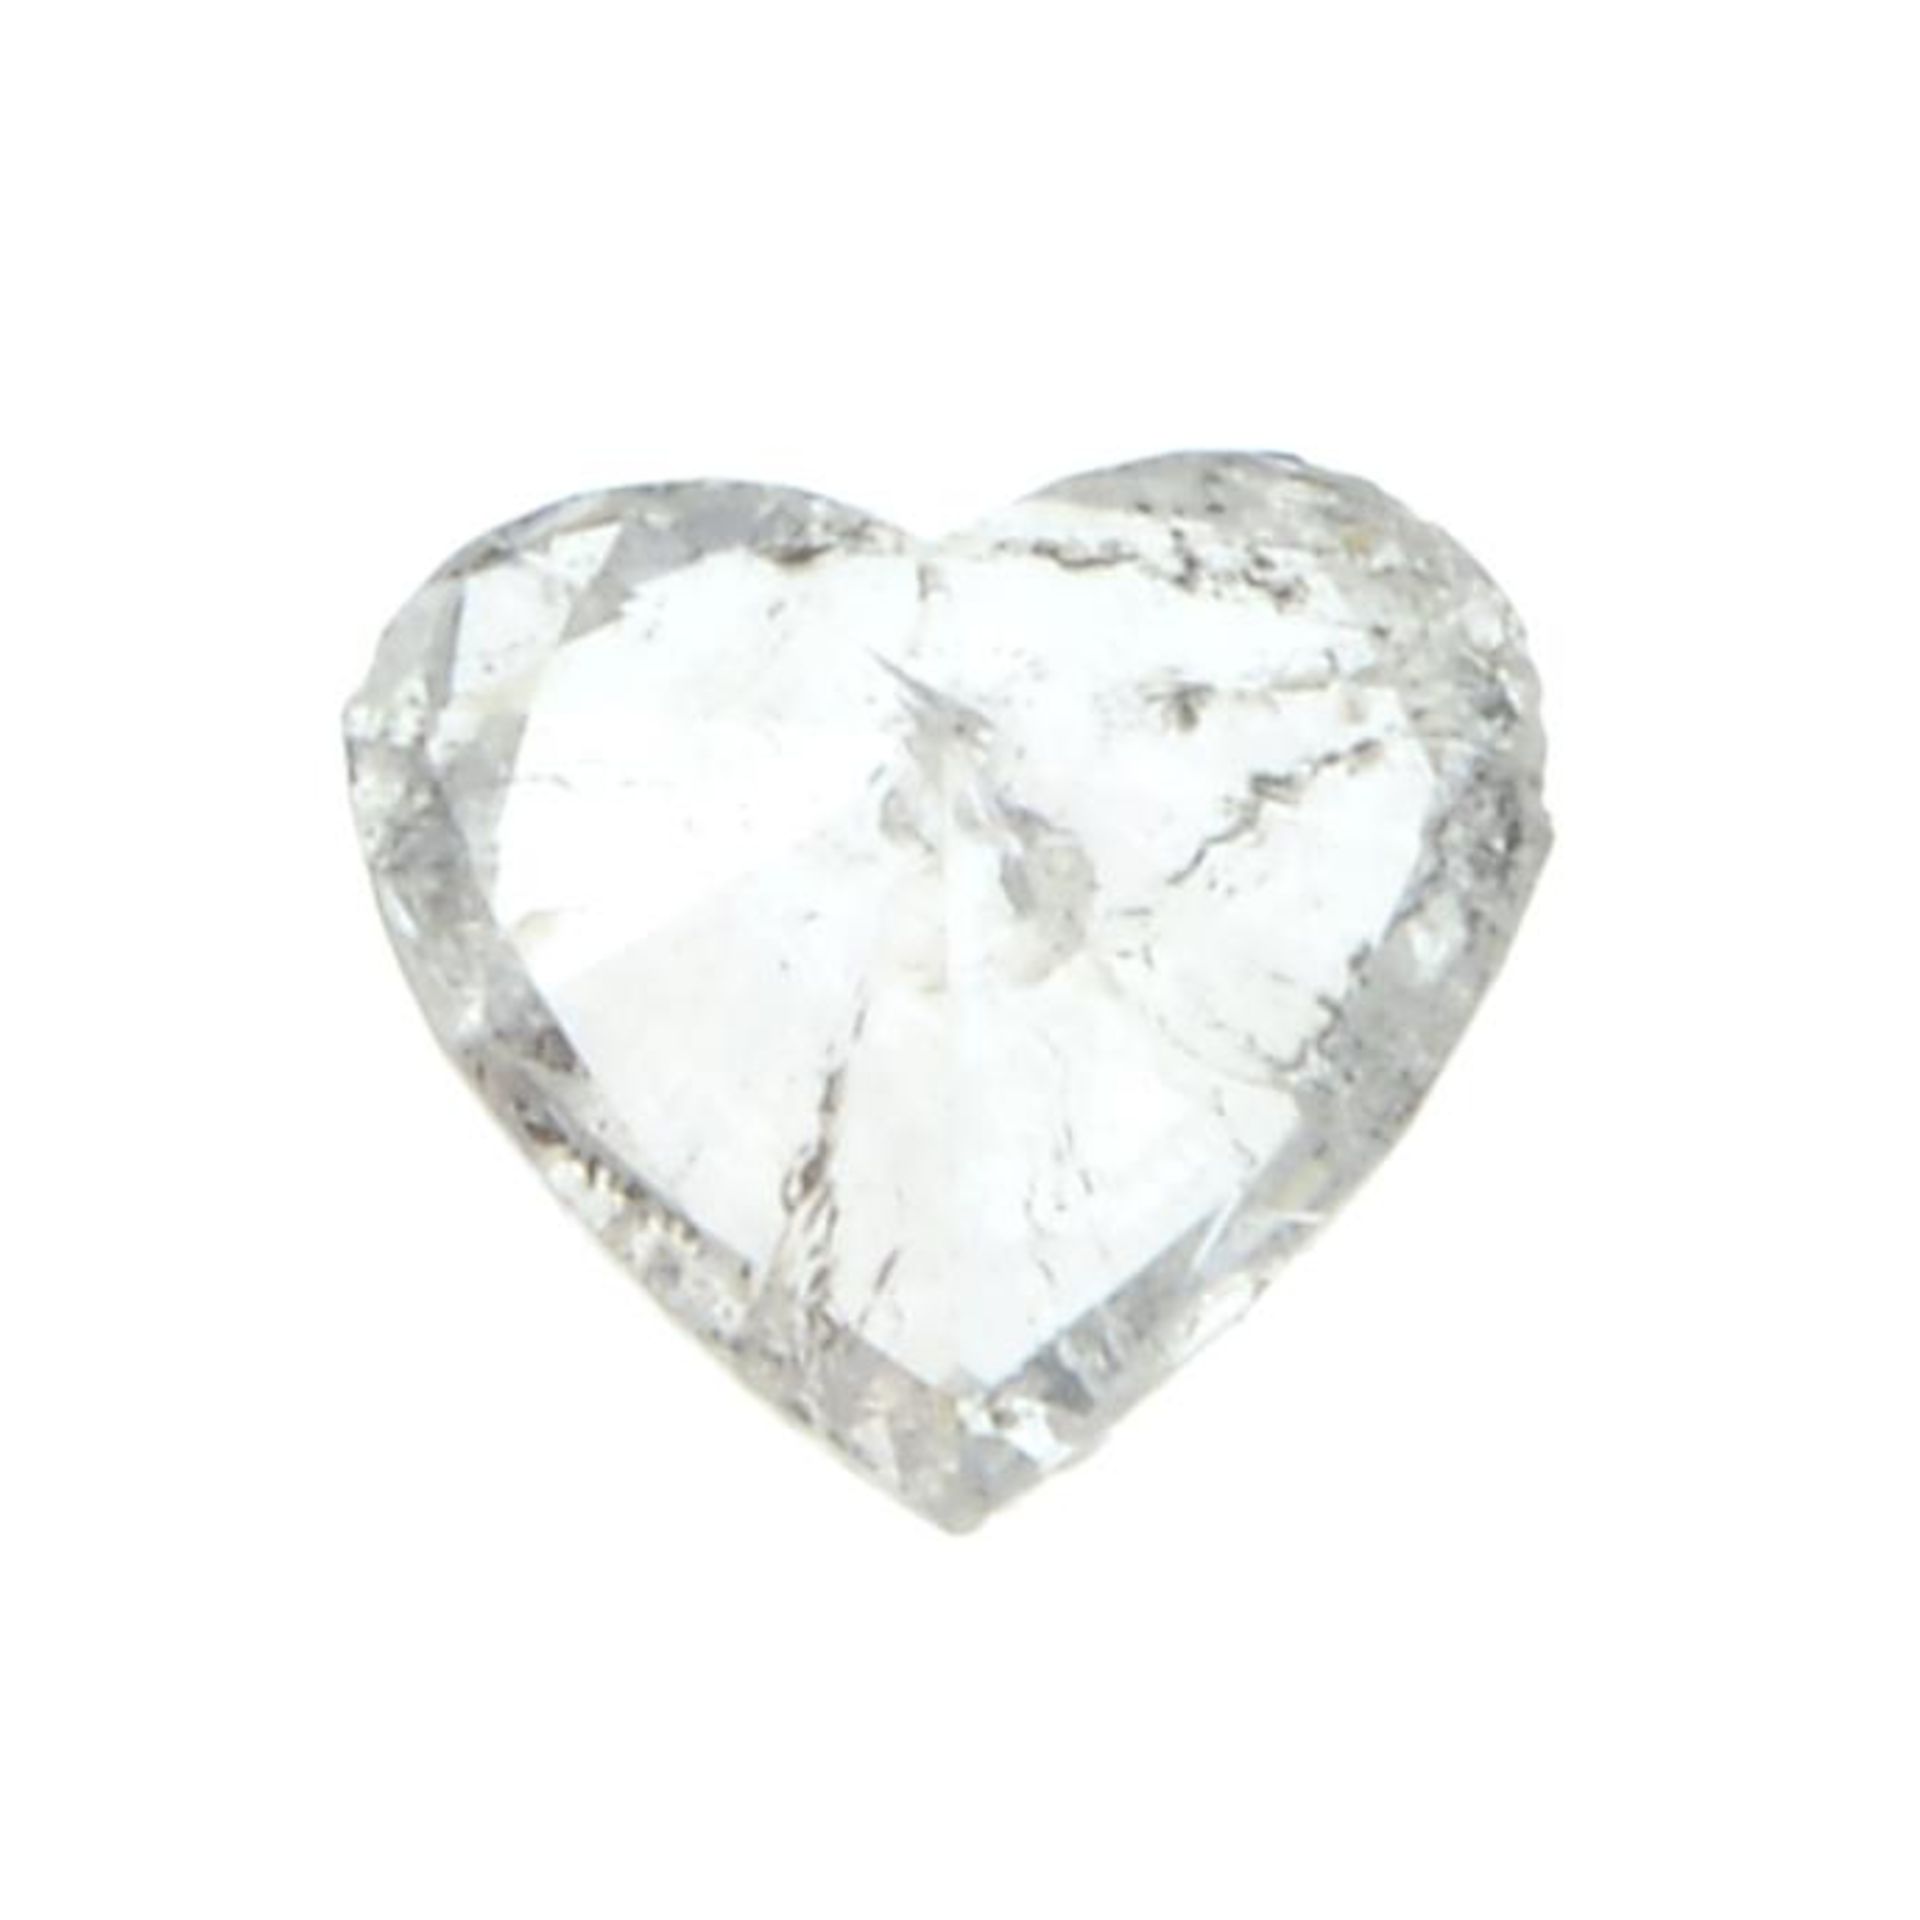 A heart shape diamond weighing 0.54ct. - Image 2 of 2